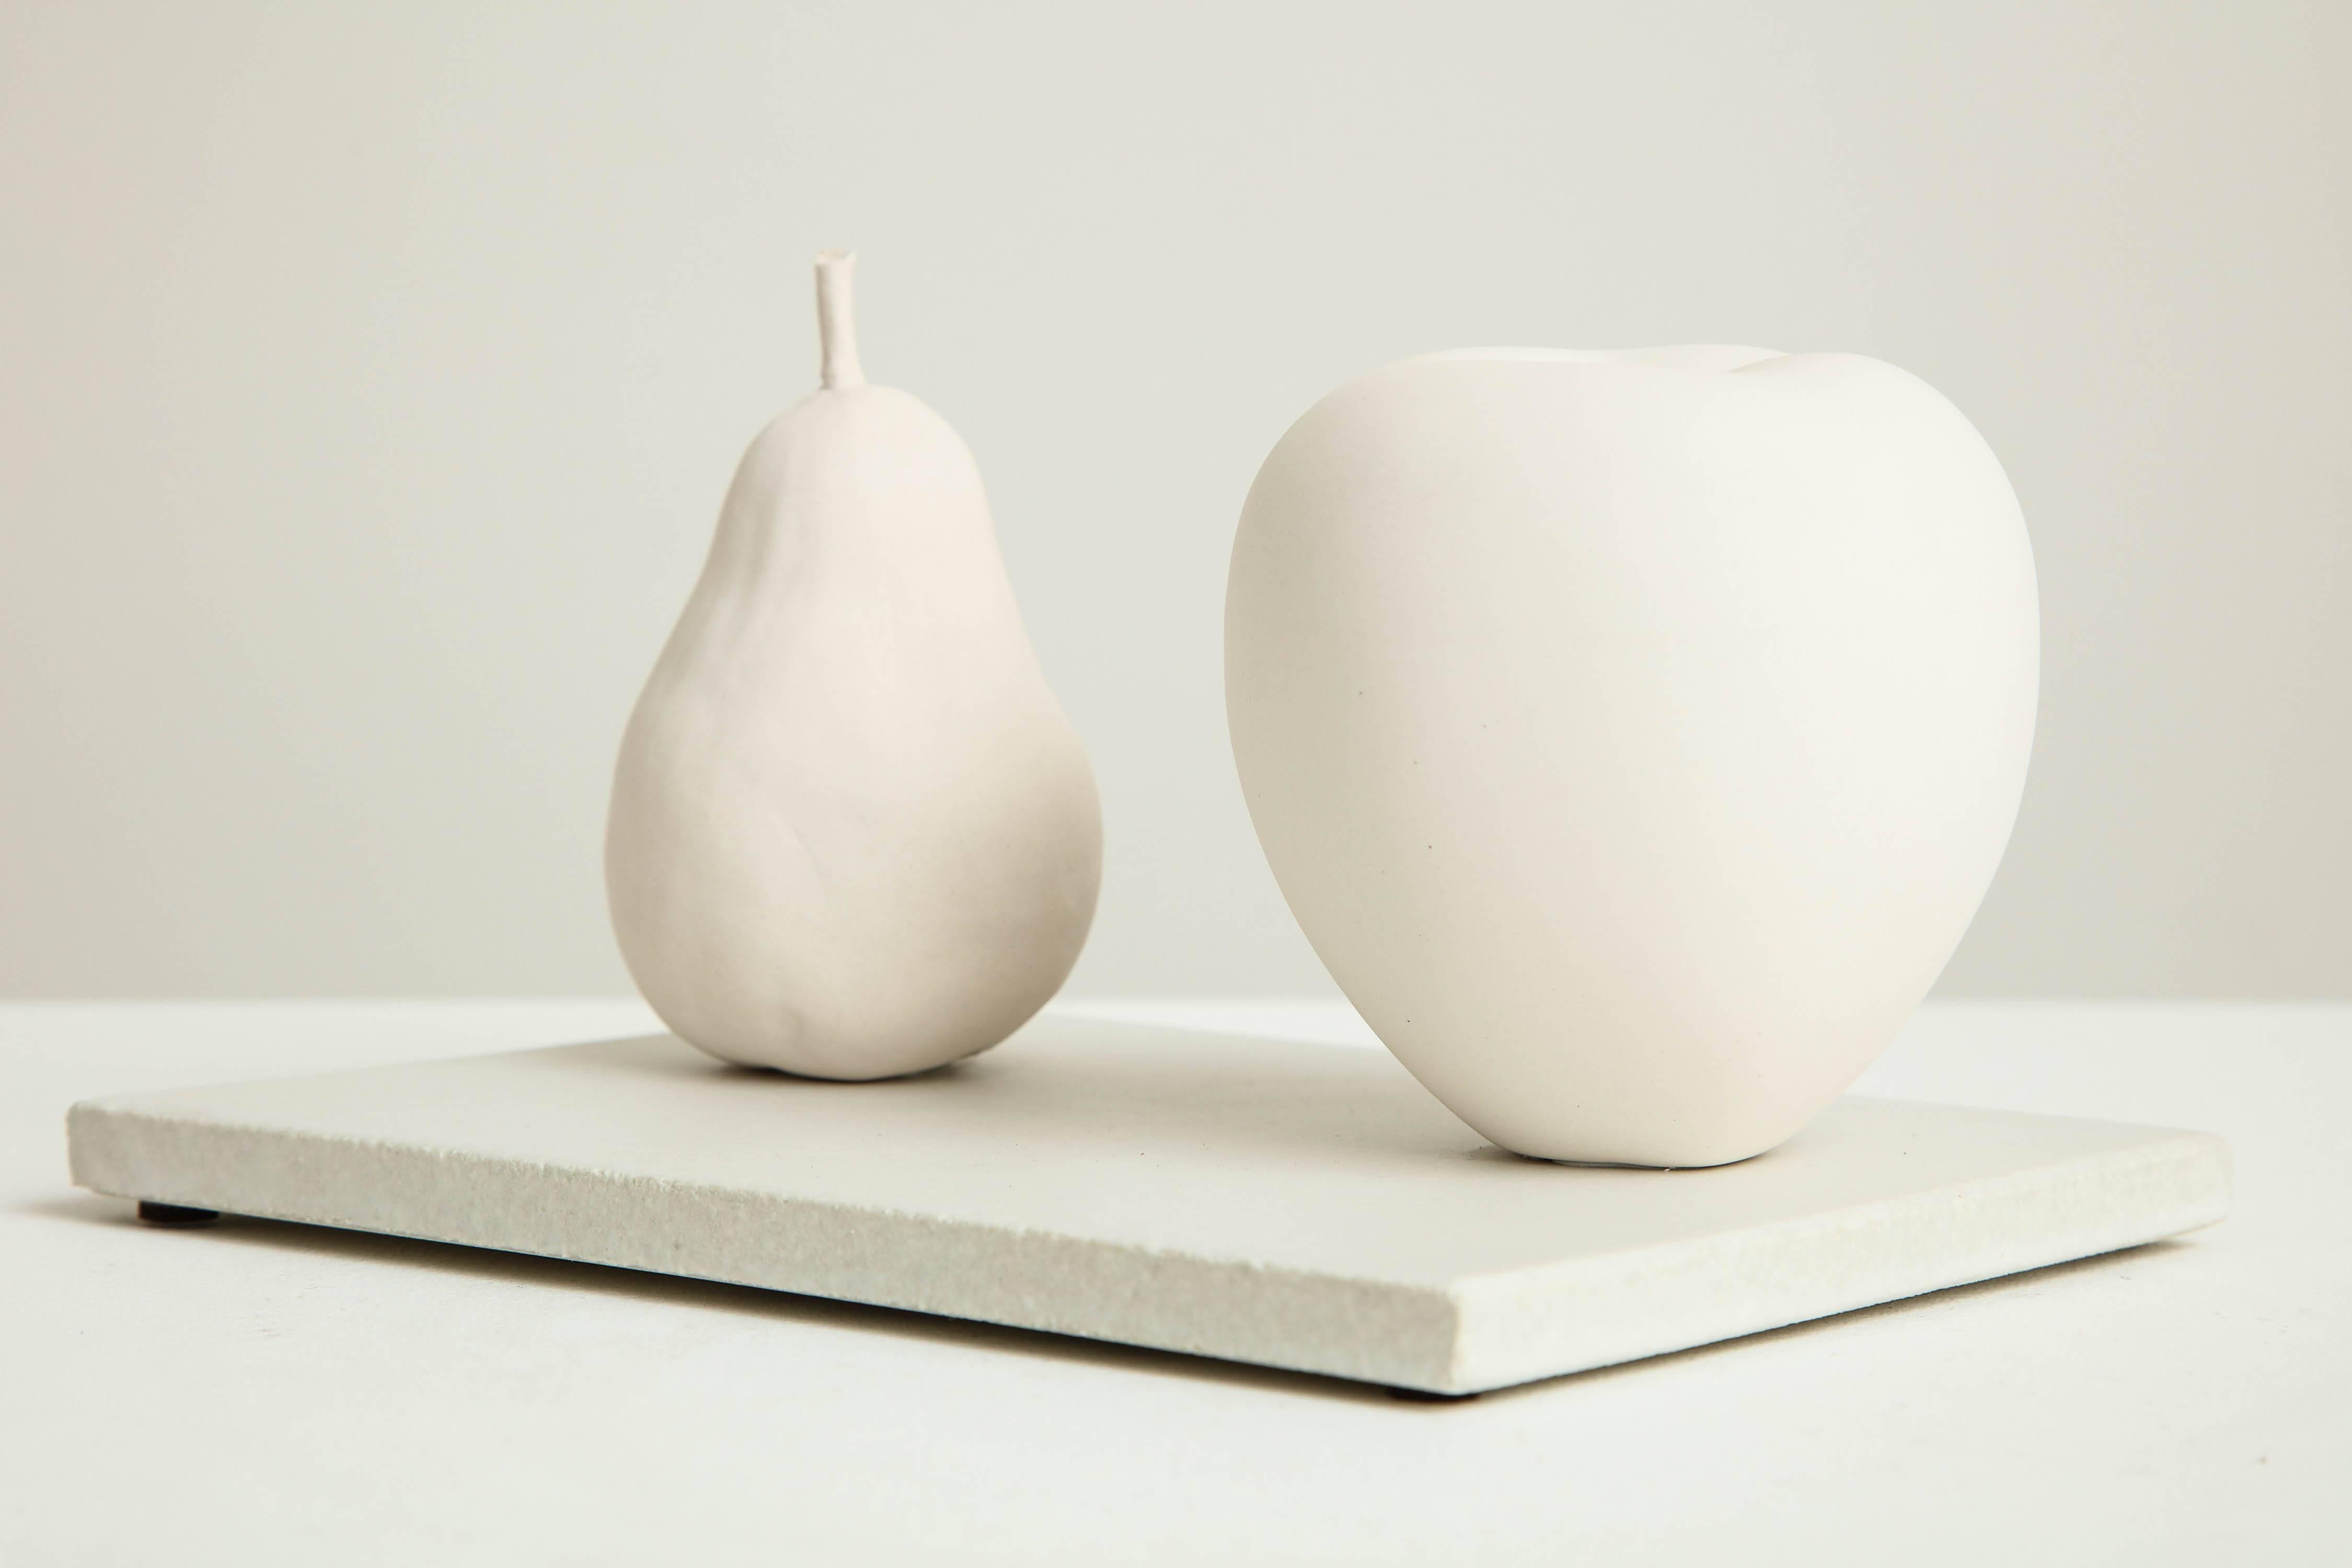 Fired Porcelain Still Life in White with Apple and Pear by Anat Shiftan, 2017